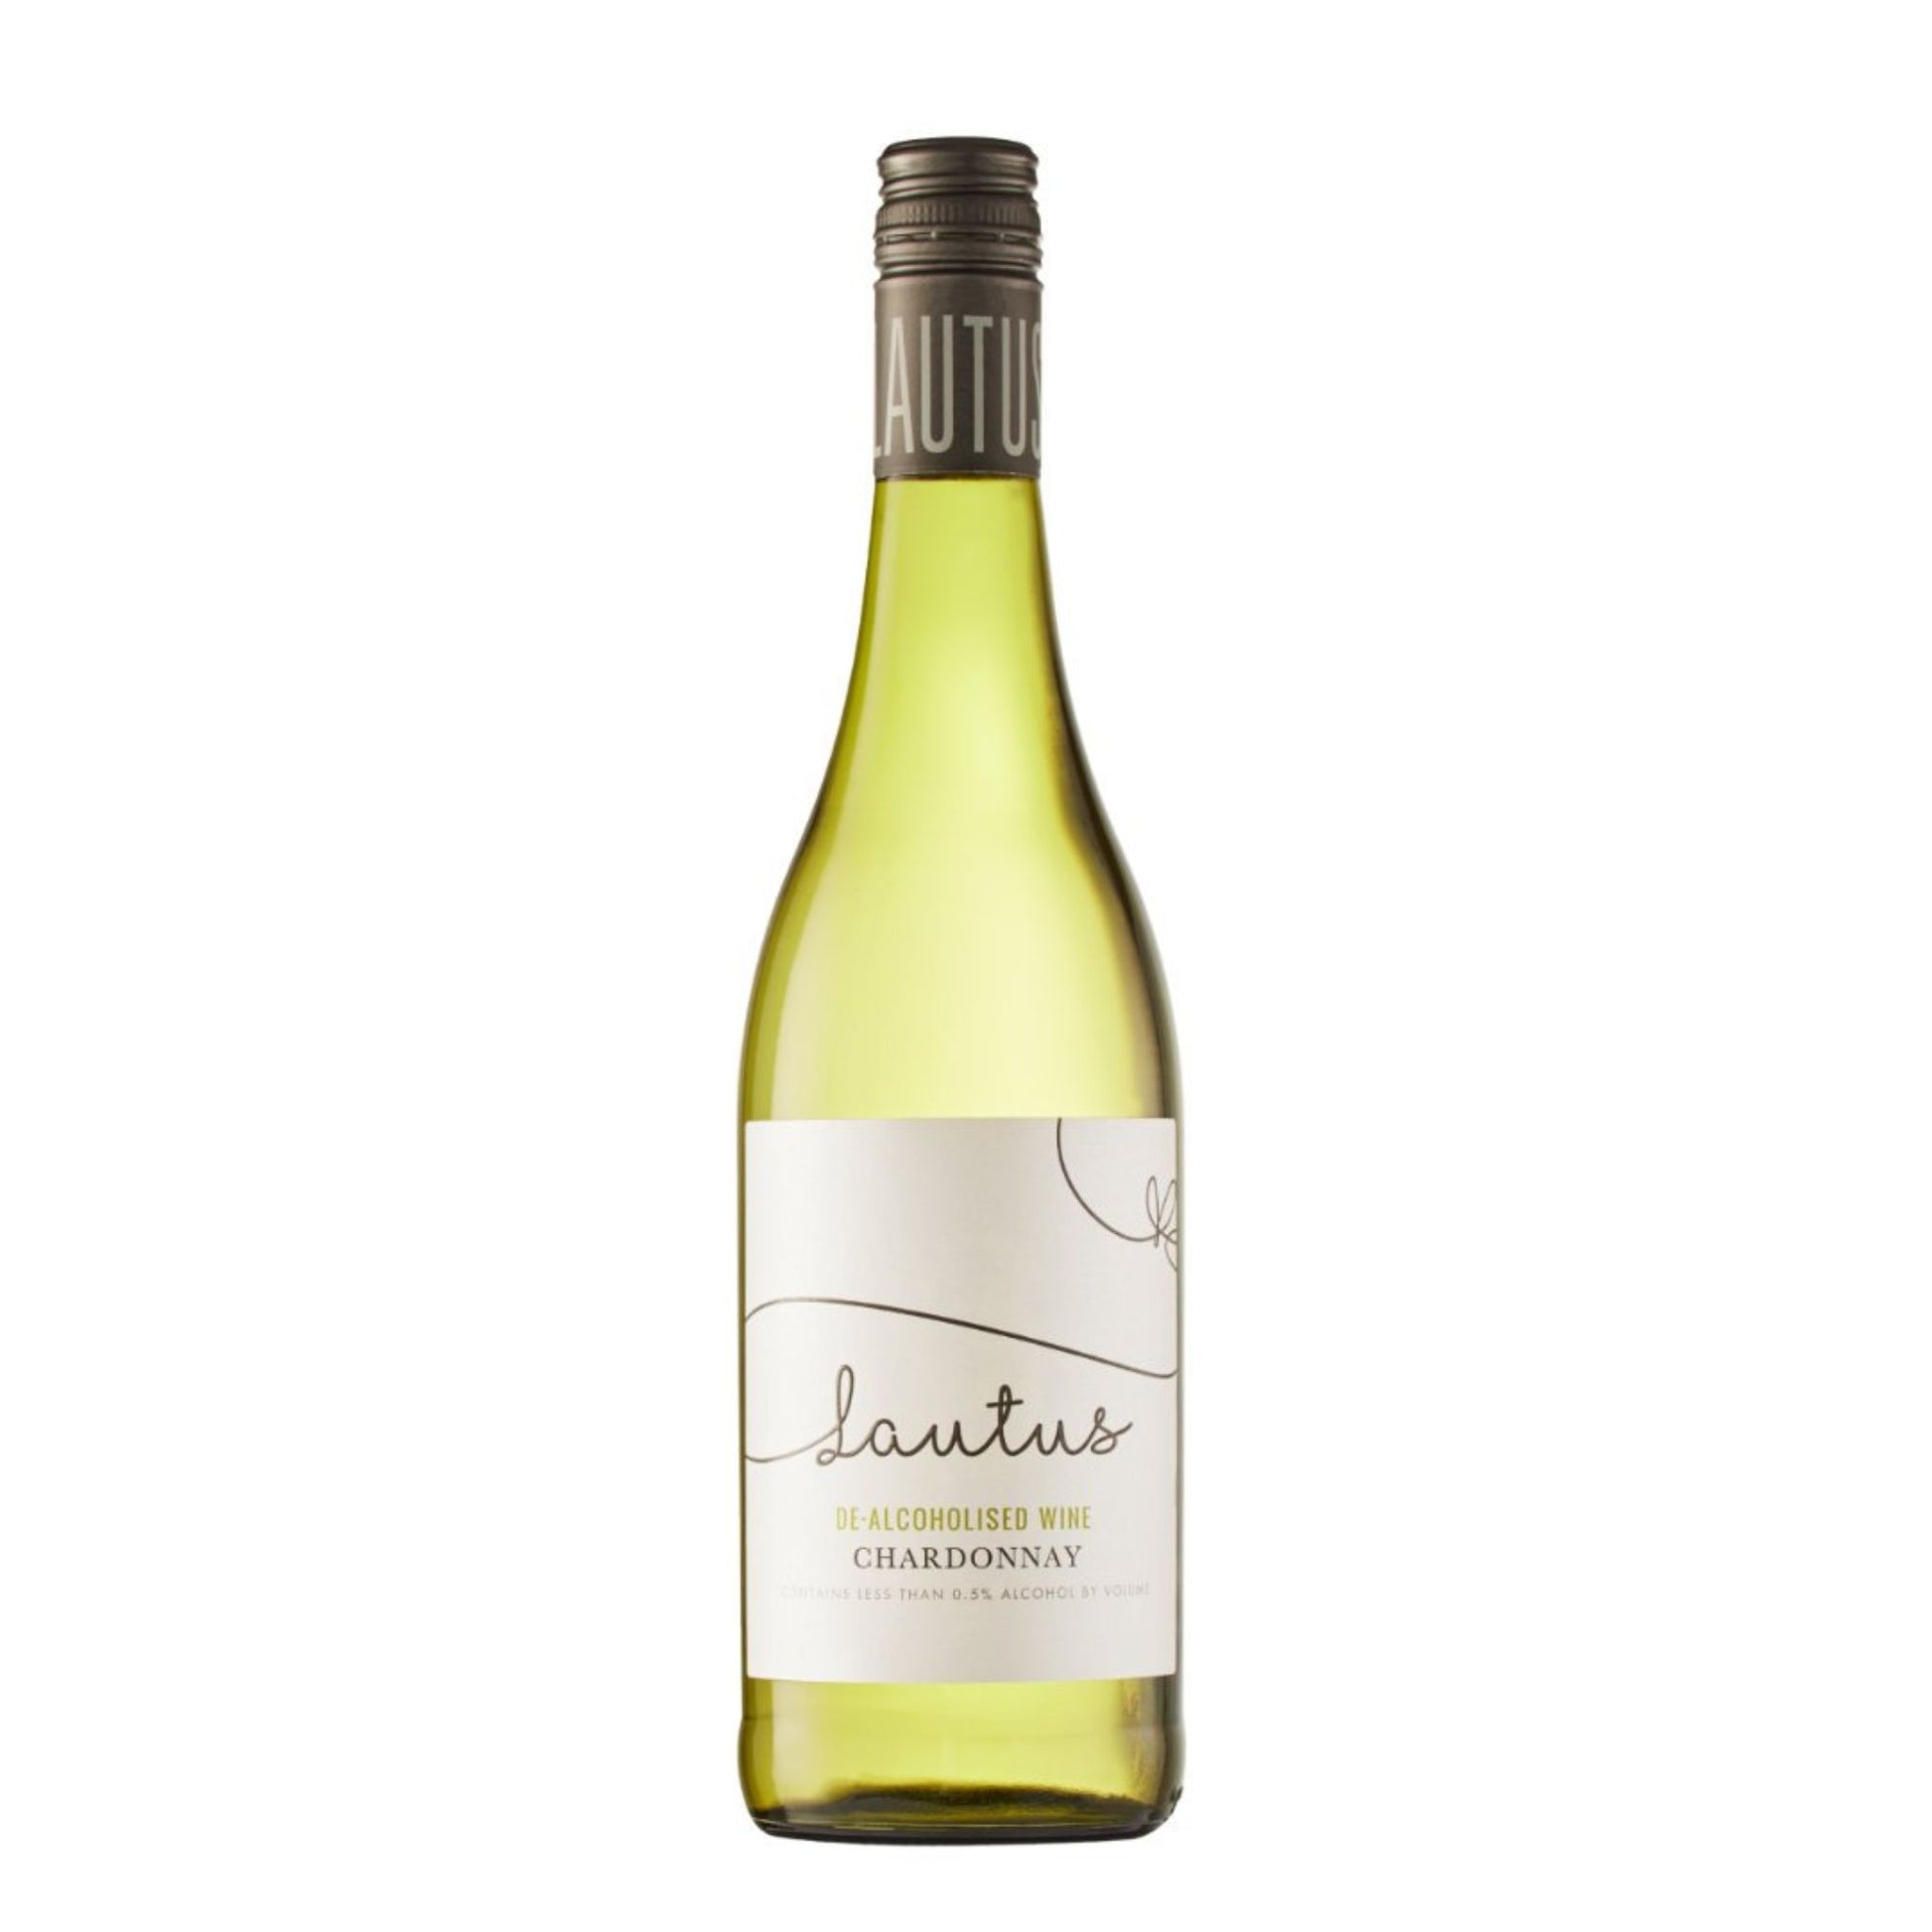 Lautus De-Alcoholised Chardonnay is available at Knyota Non-Alcoholic Drinks.